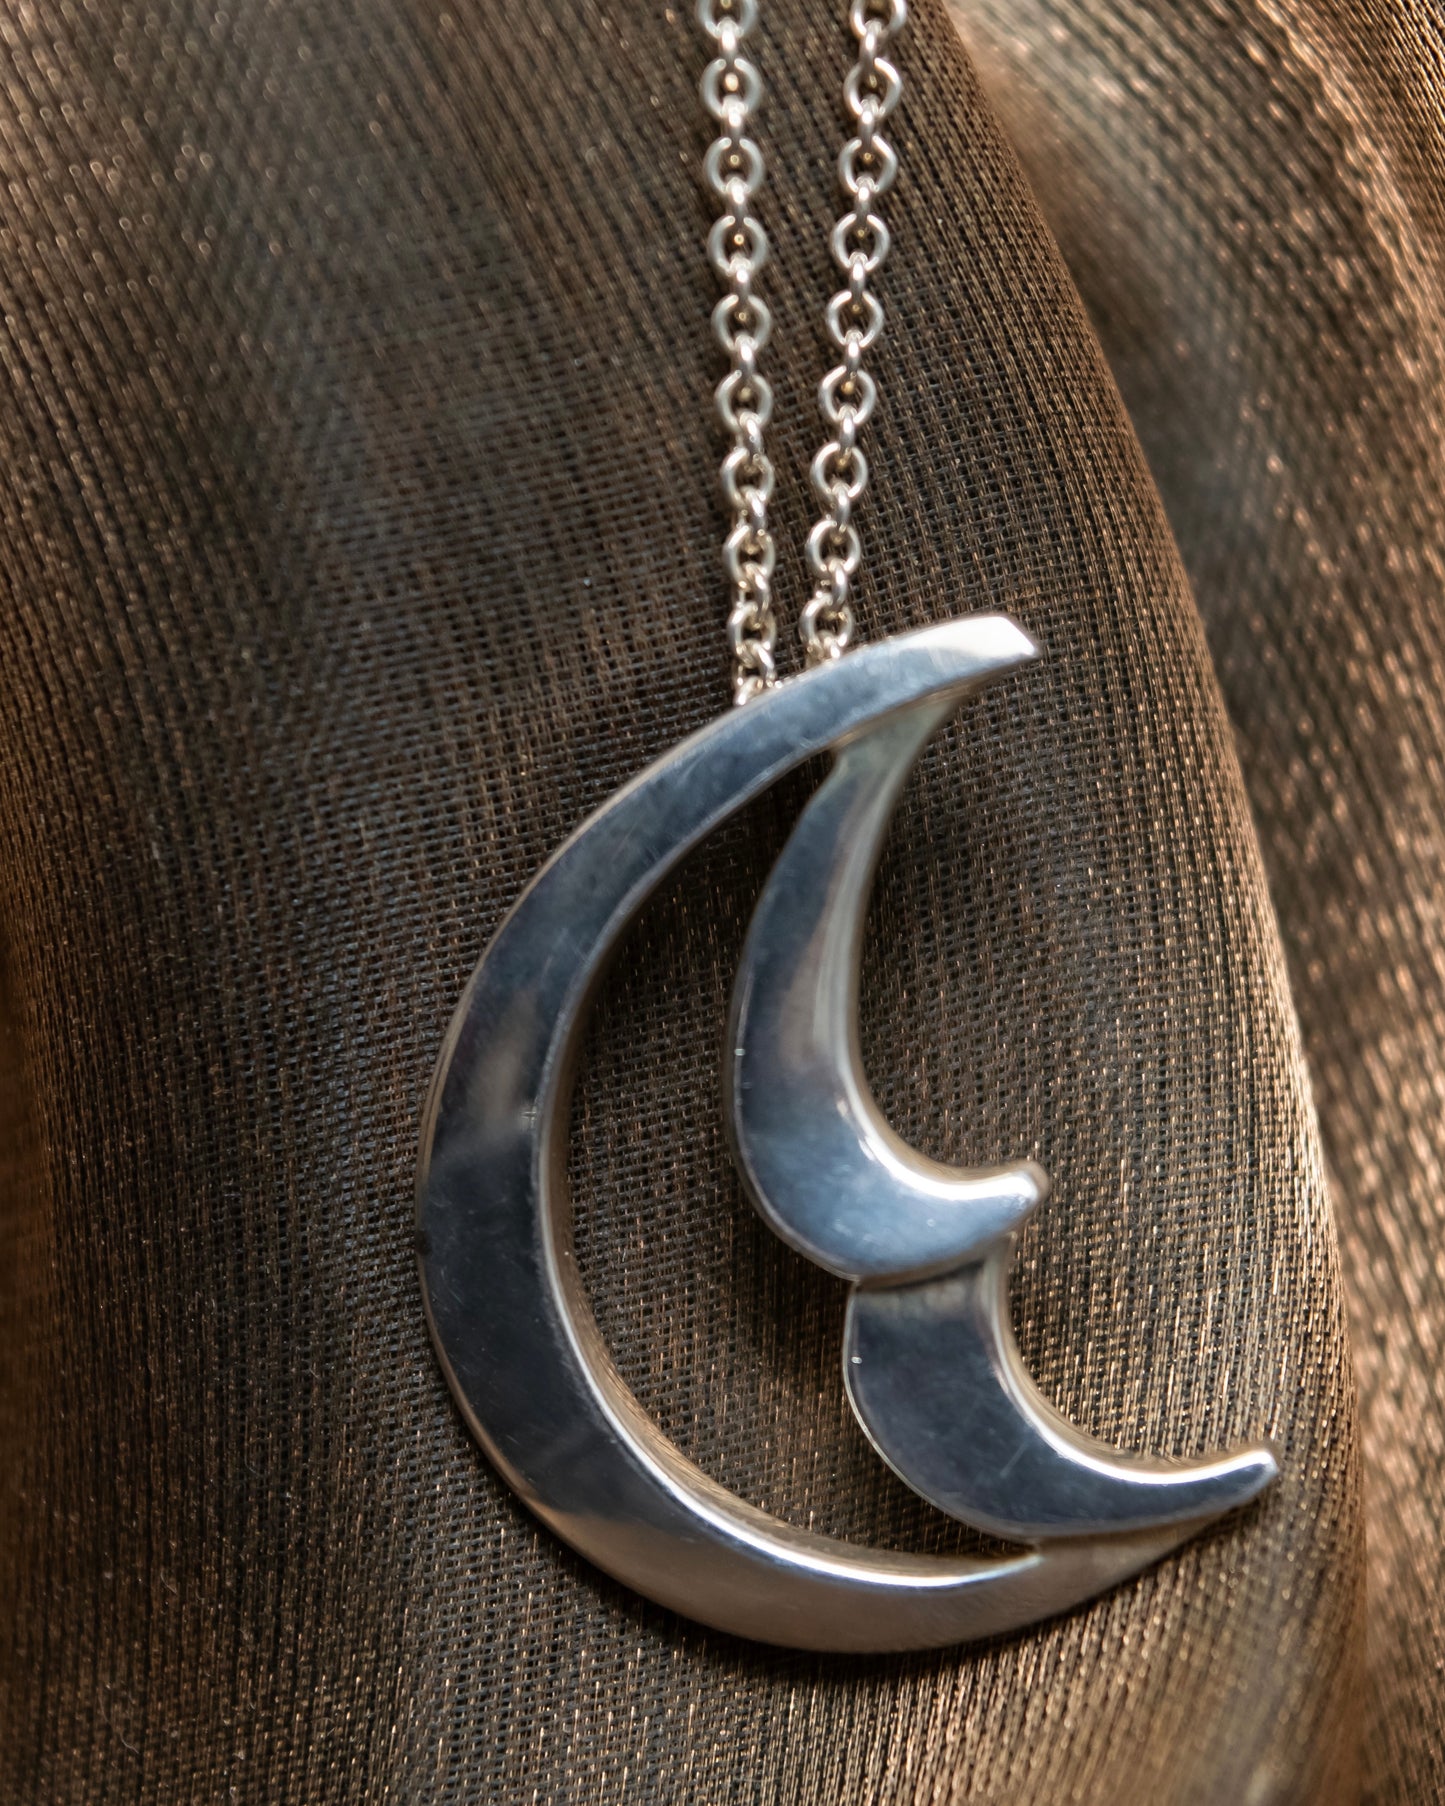 "Tiffany&Co" Crescent moon paloma picasso necklace